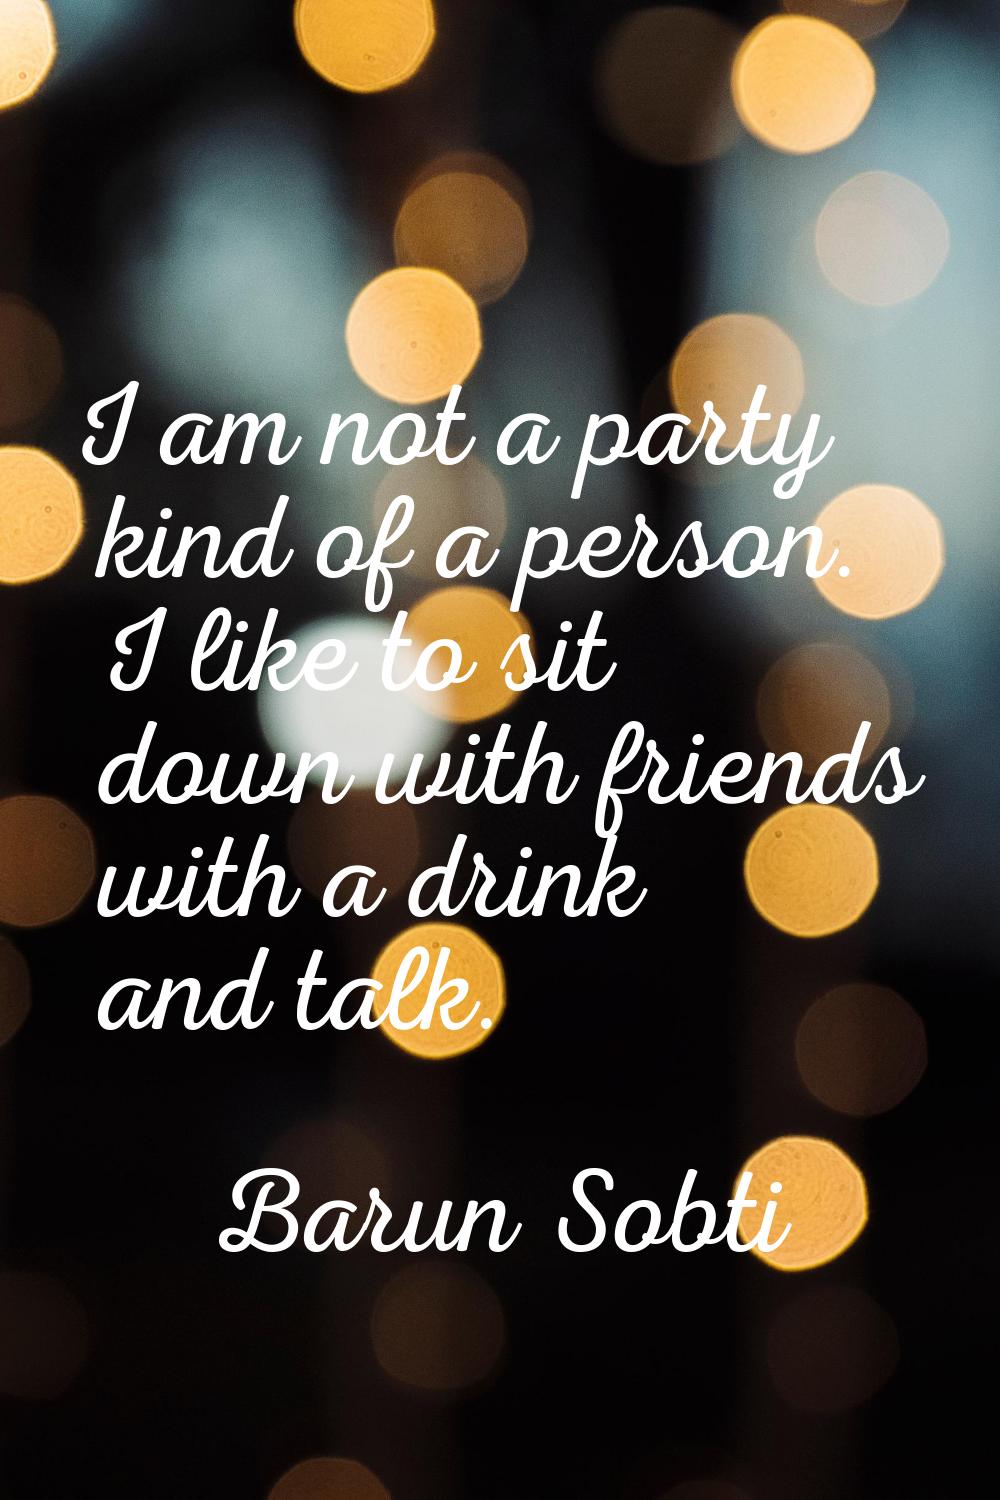 I am not a party kind of a person. I like to sit down with friends with a drink and talk.